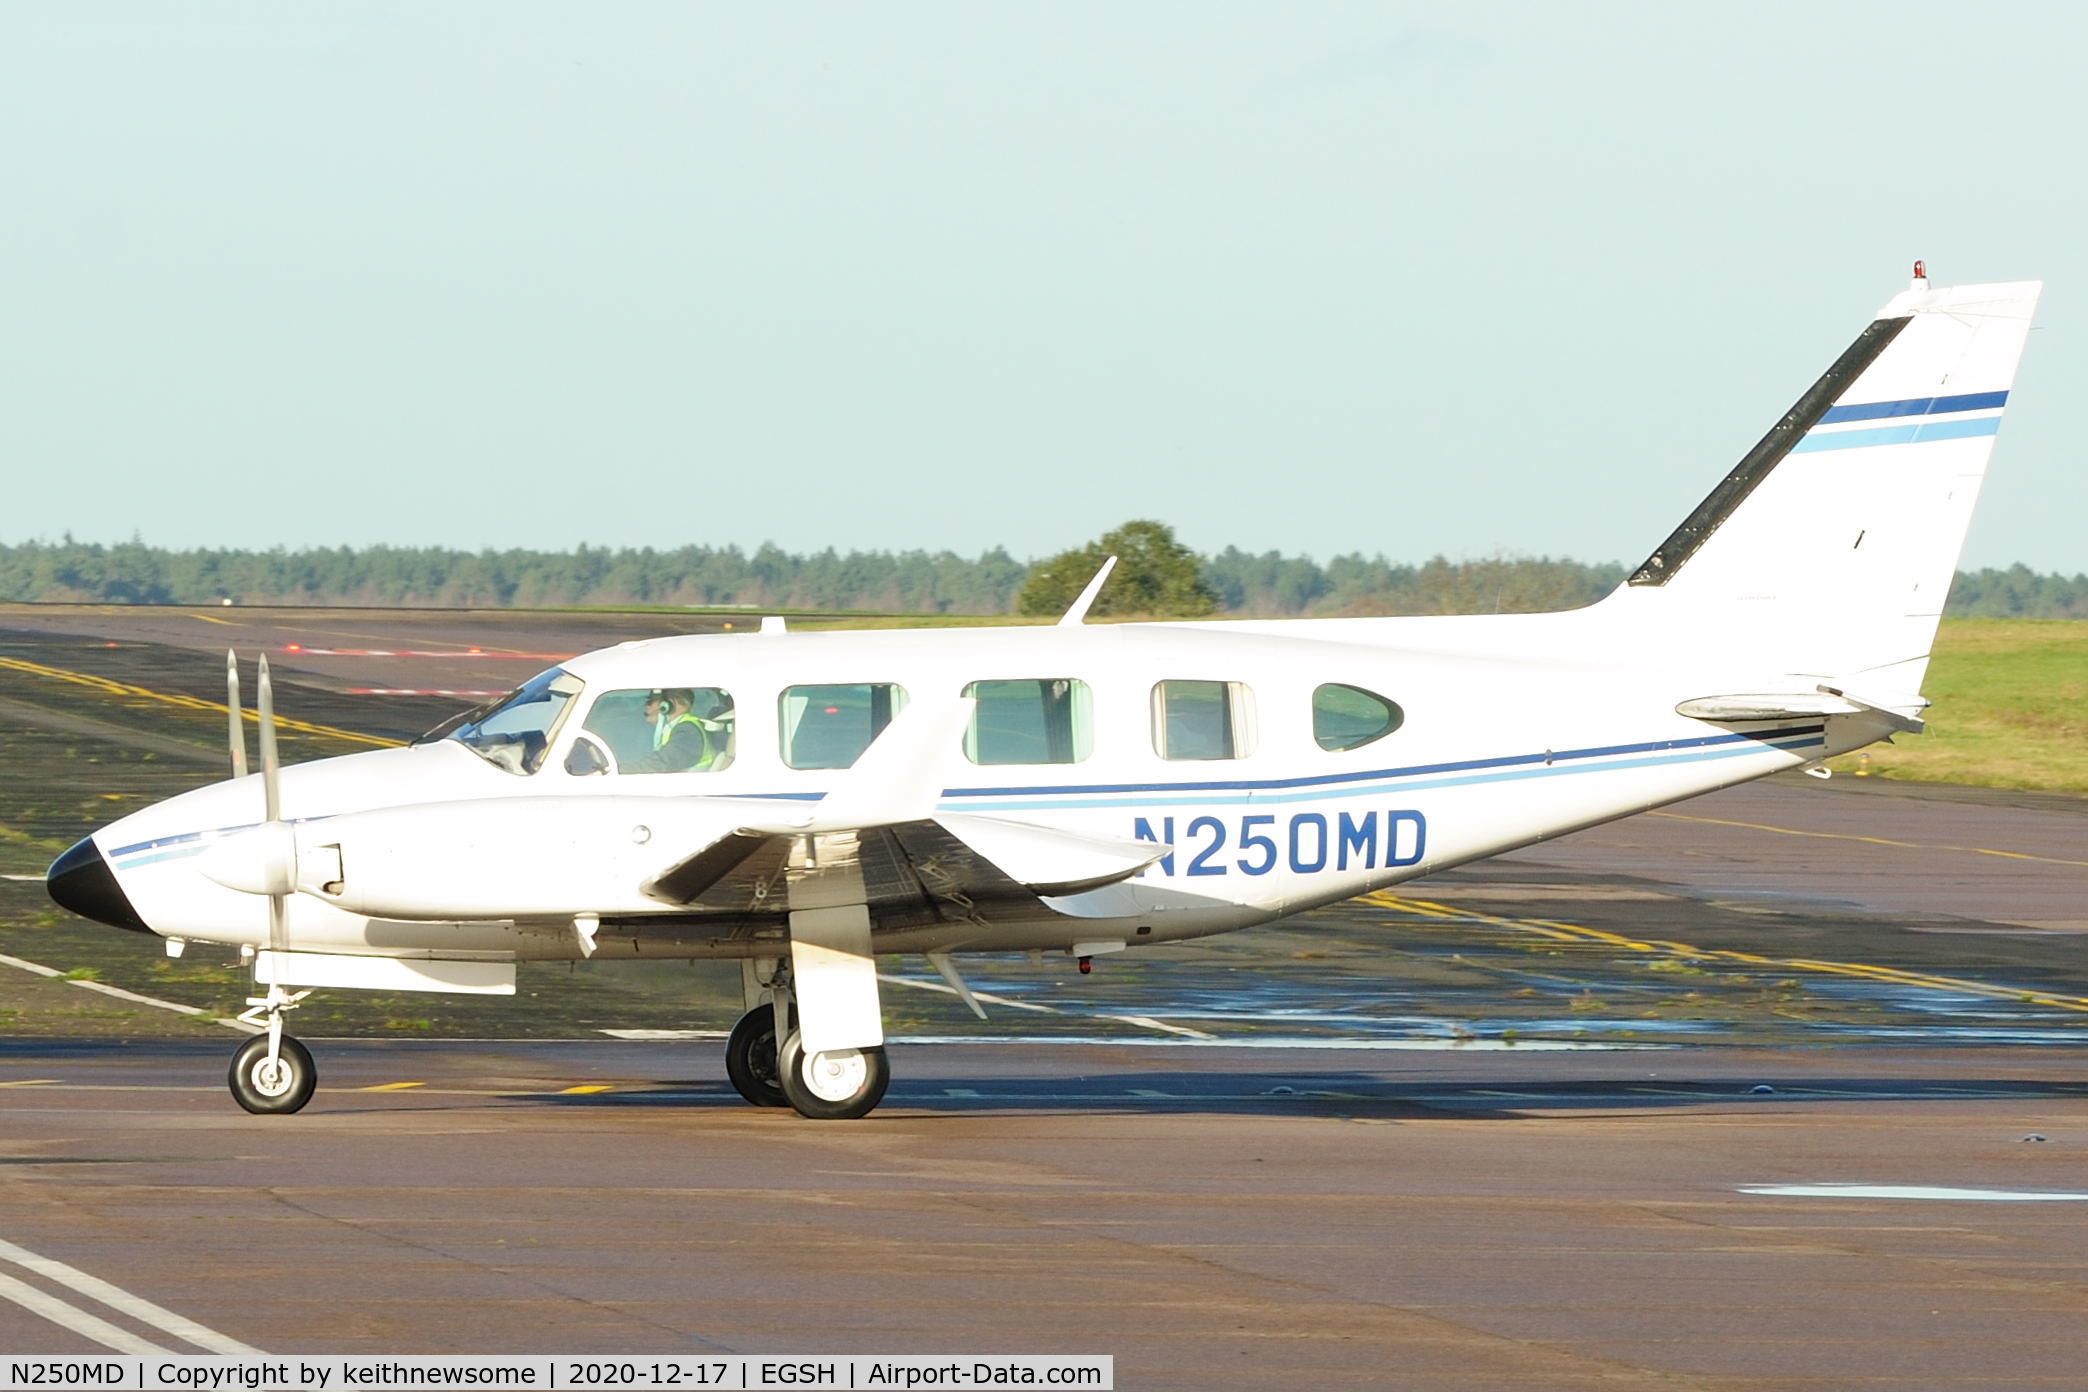 N250MD, 1971 Piper PA-31 Navajo C/N 31-742, Arriving at Norwich from Biggin Hill.